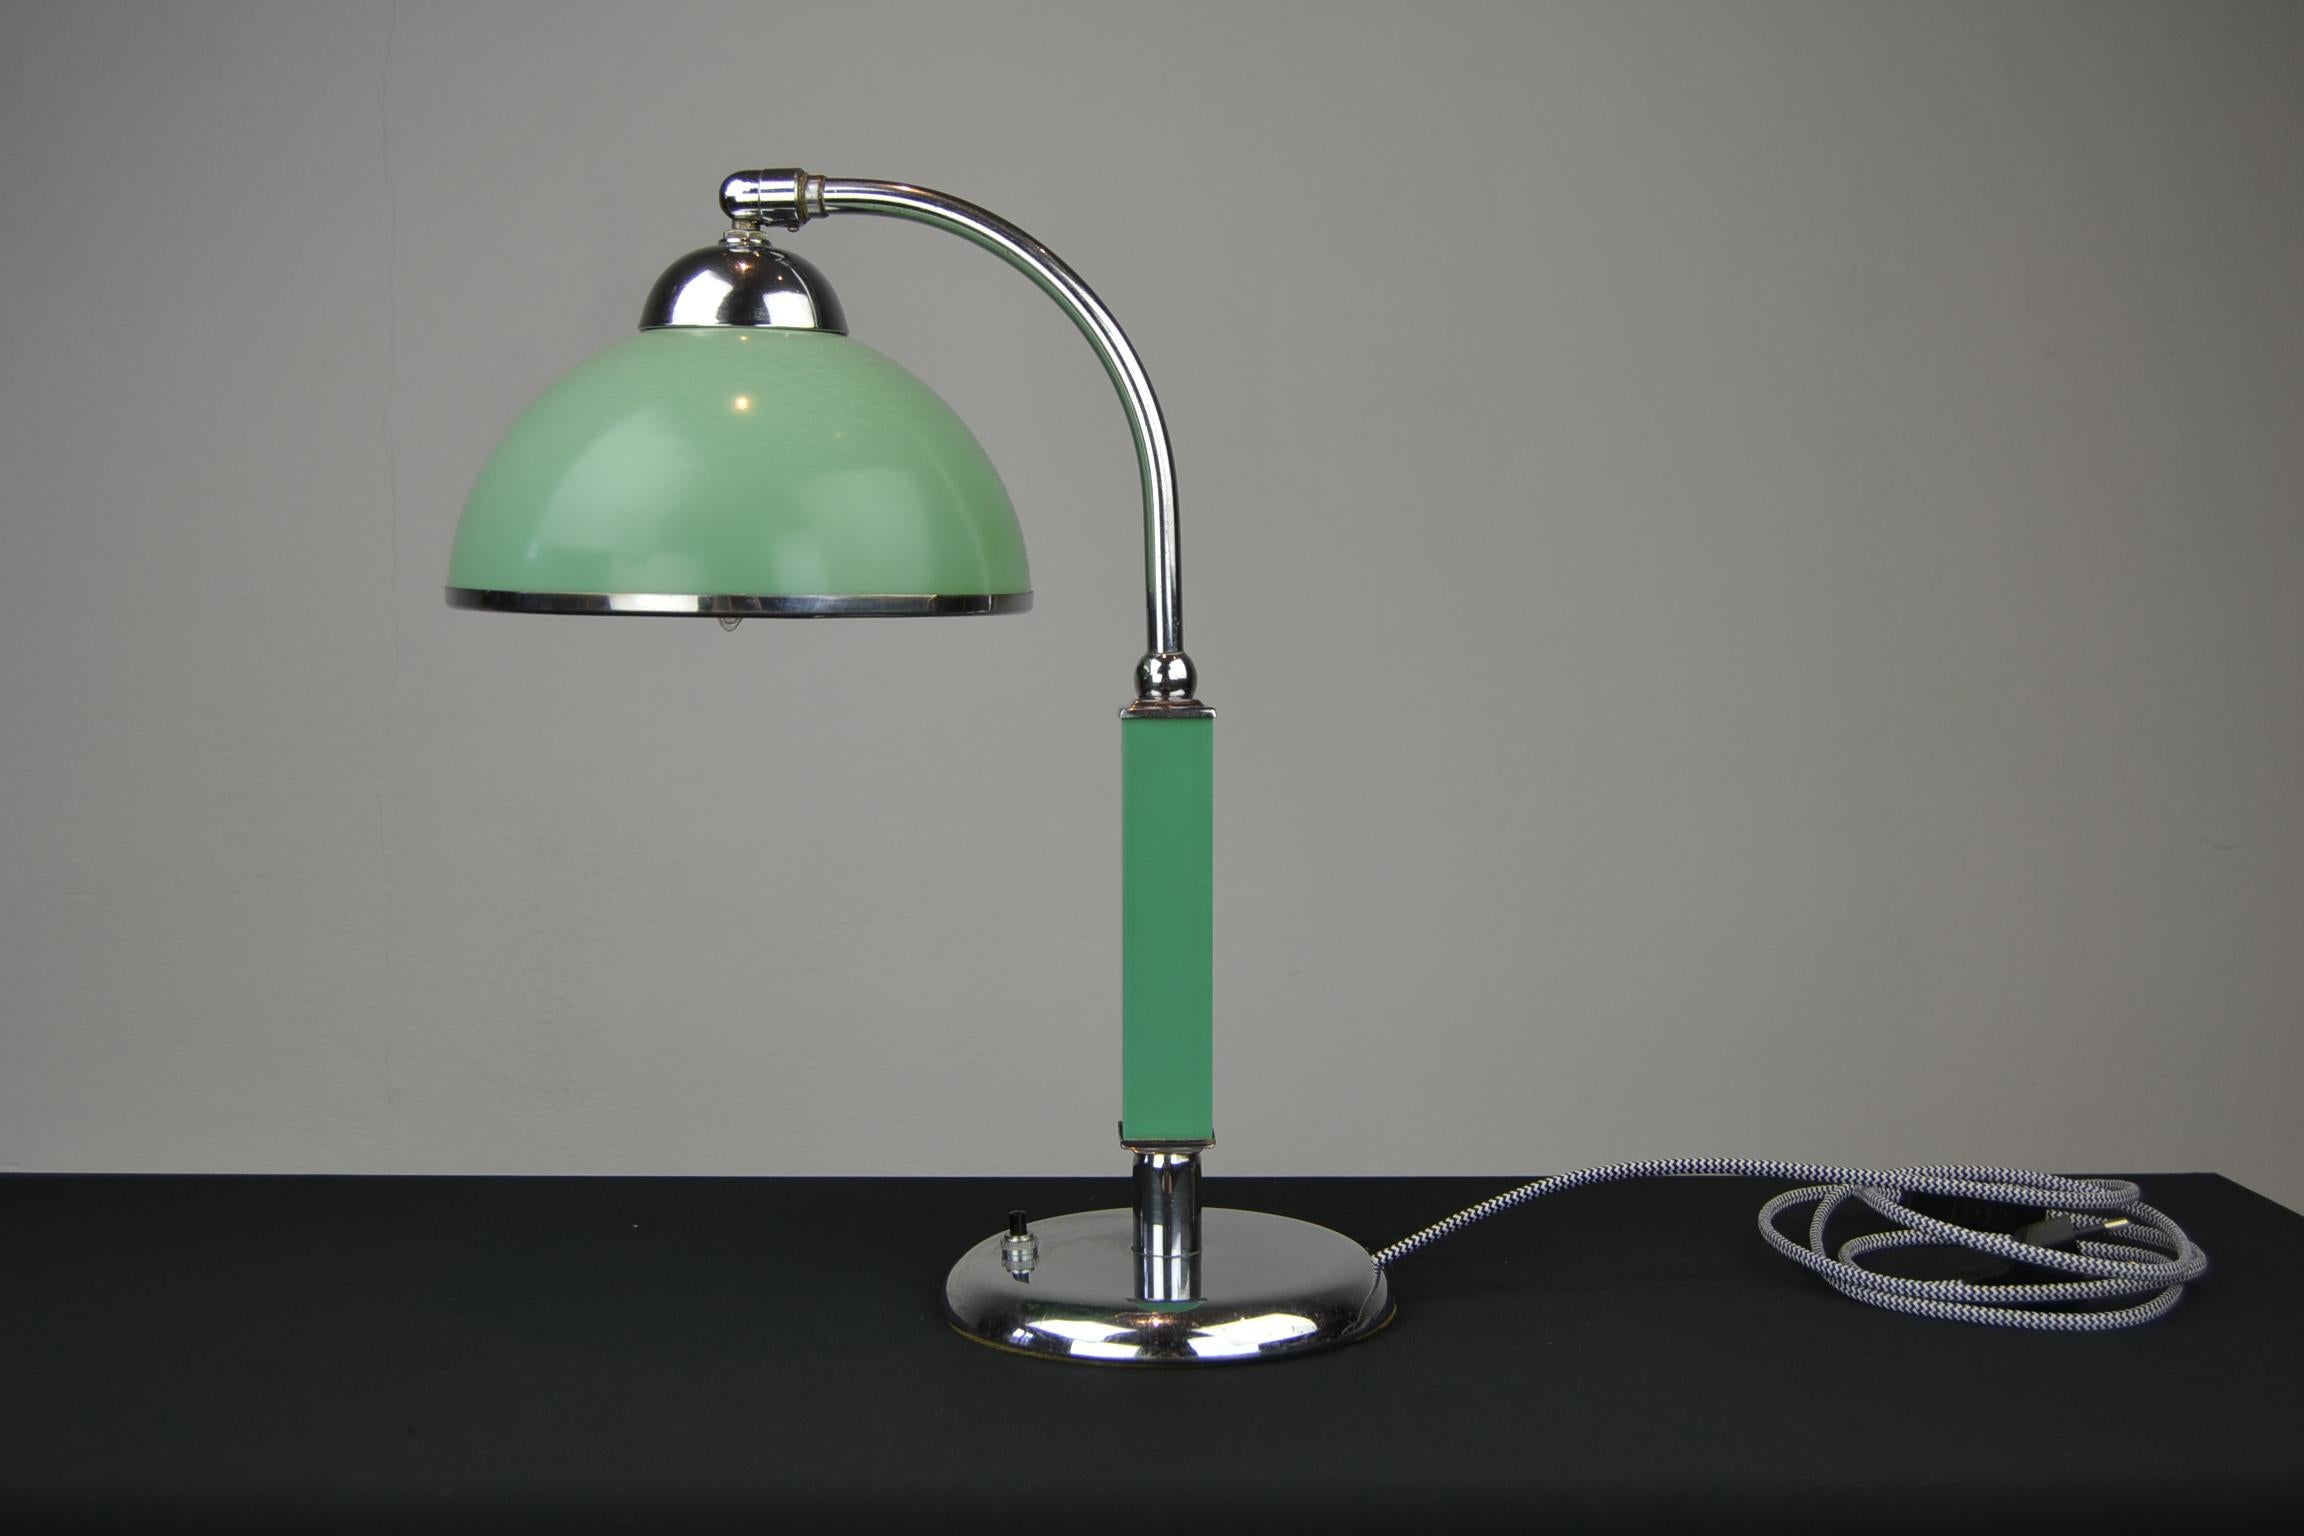 Art Deco green Bakelite desk lamp.
This Bauhaus style desk lamp dates from the late 1920s and was made in Germany. It's made from nickel plated brass with a green Bakelite shade and green Bakelite details on the base. 

The shade can be put in